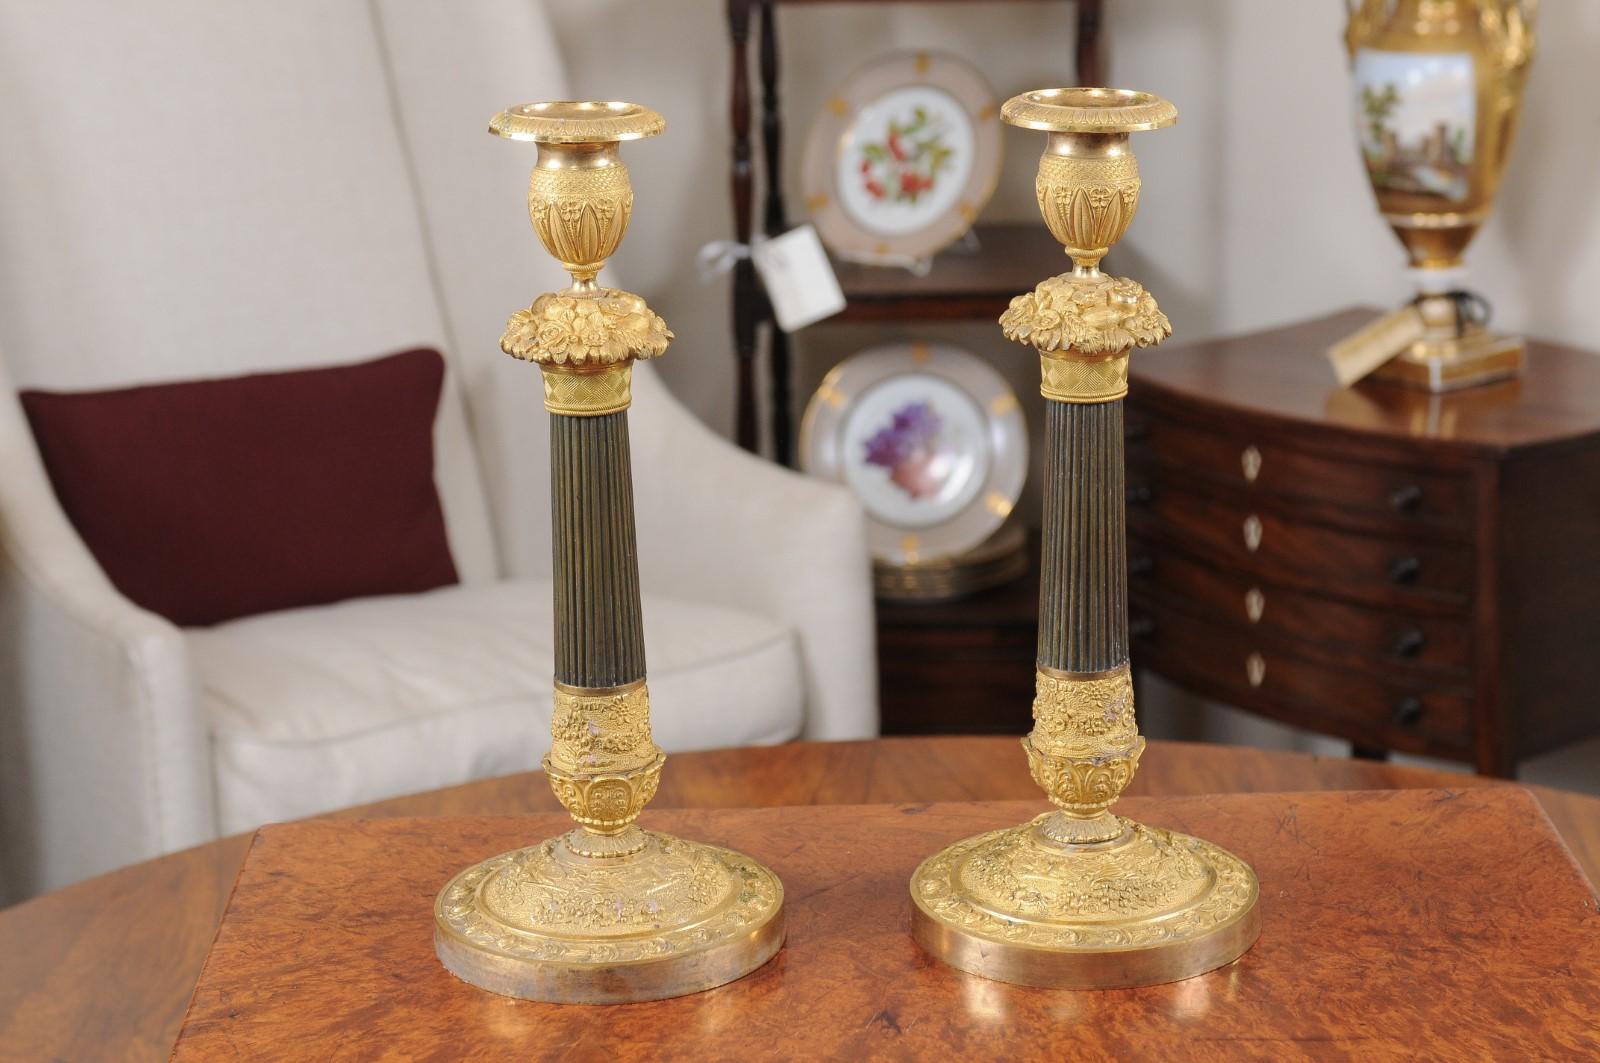 Pair of Bronze Dore Candlesticks with Foliage Design, Early 19th Century France For Sale 4